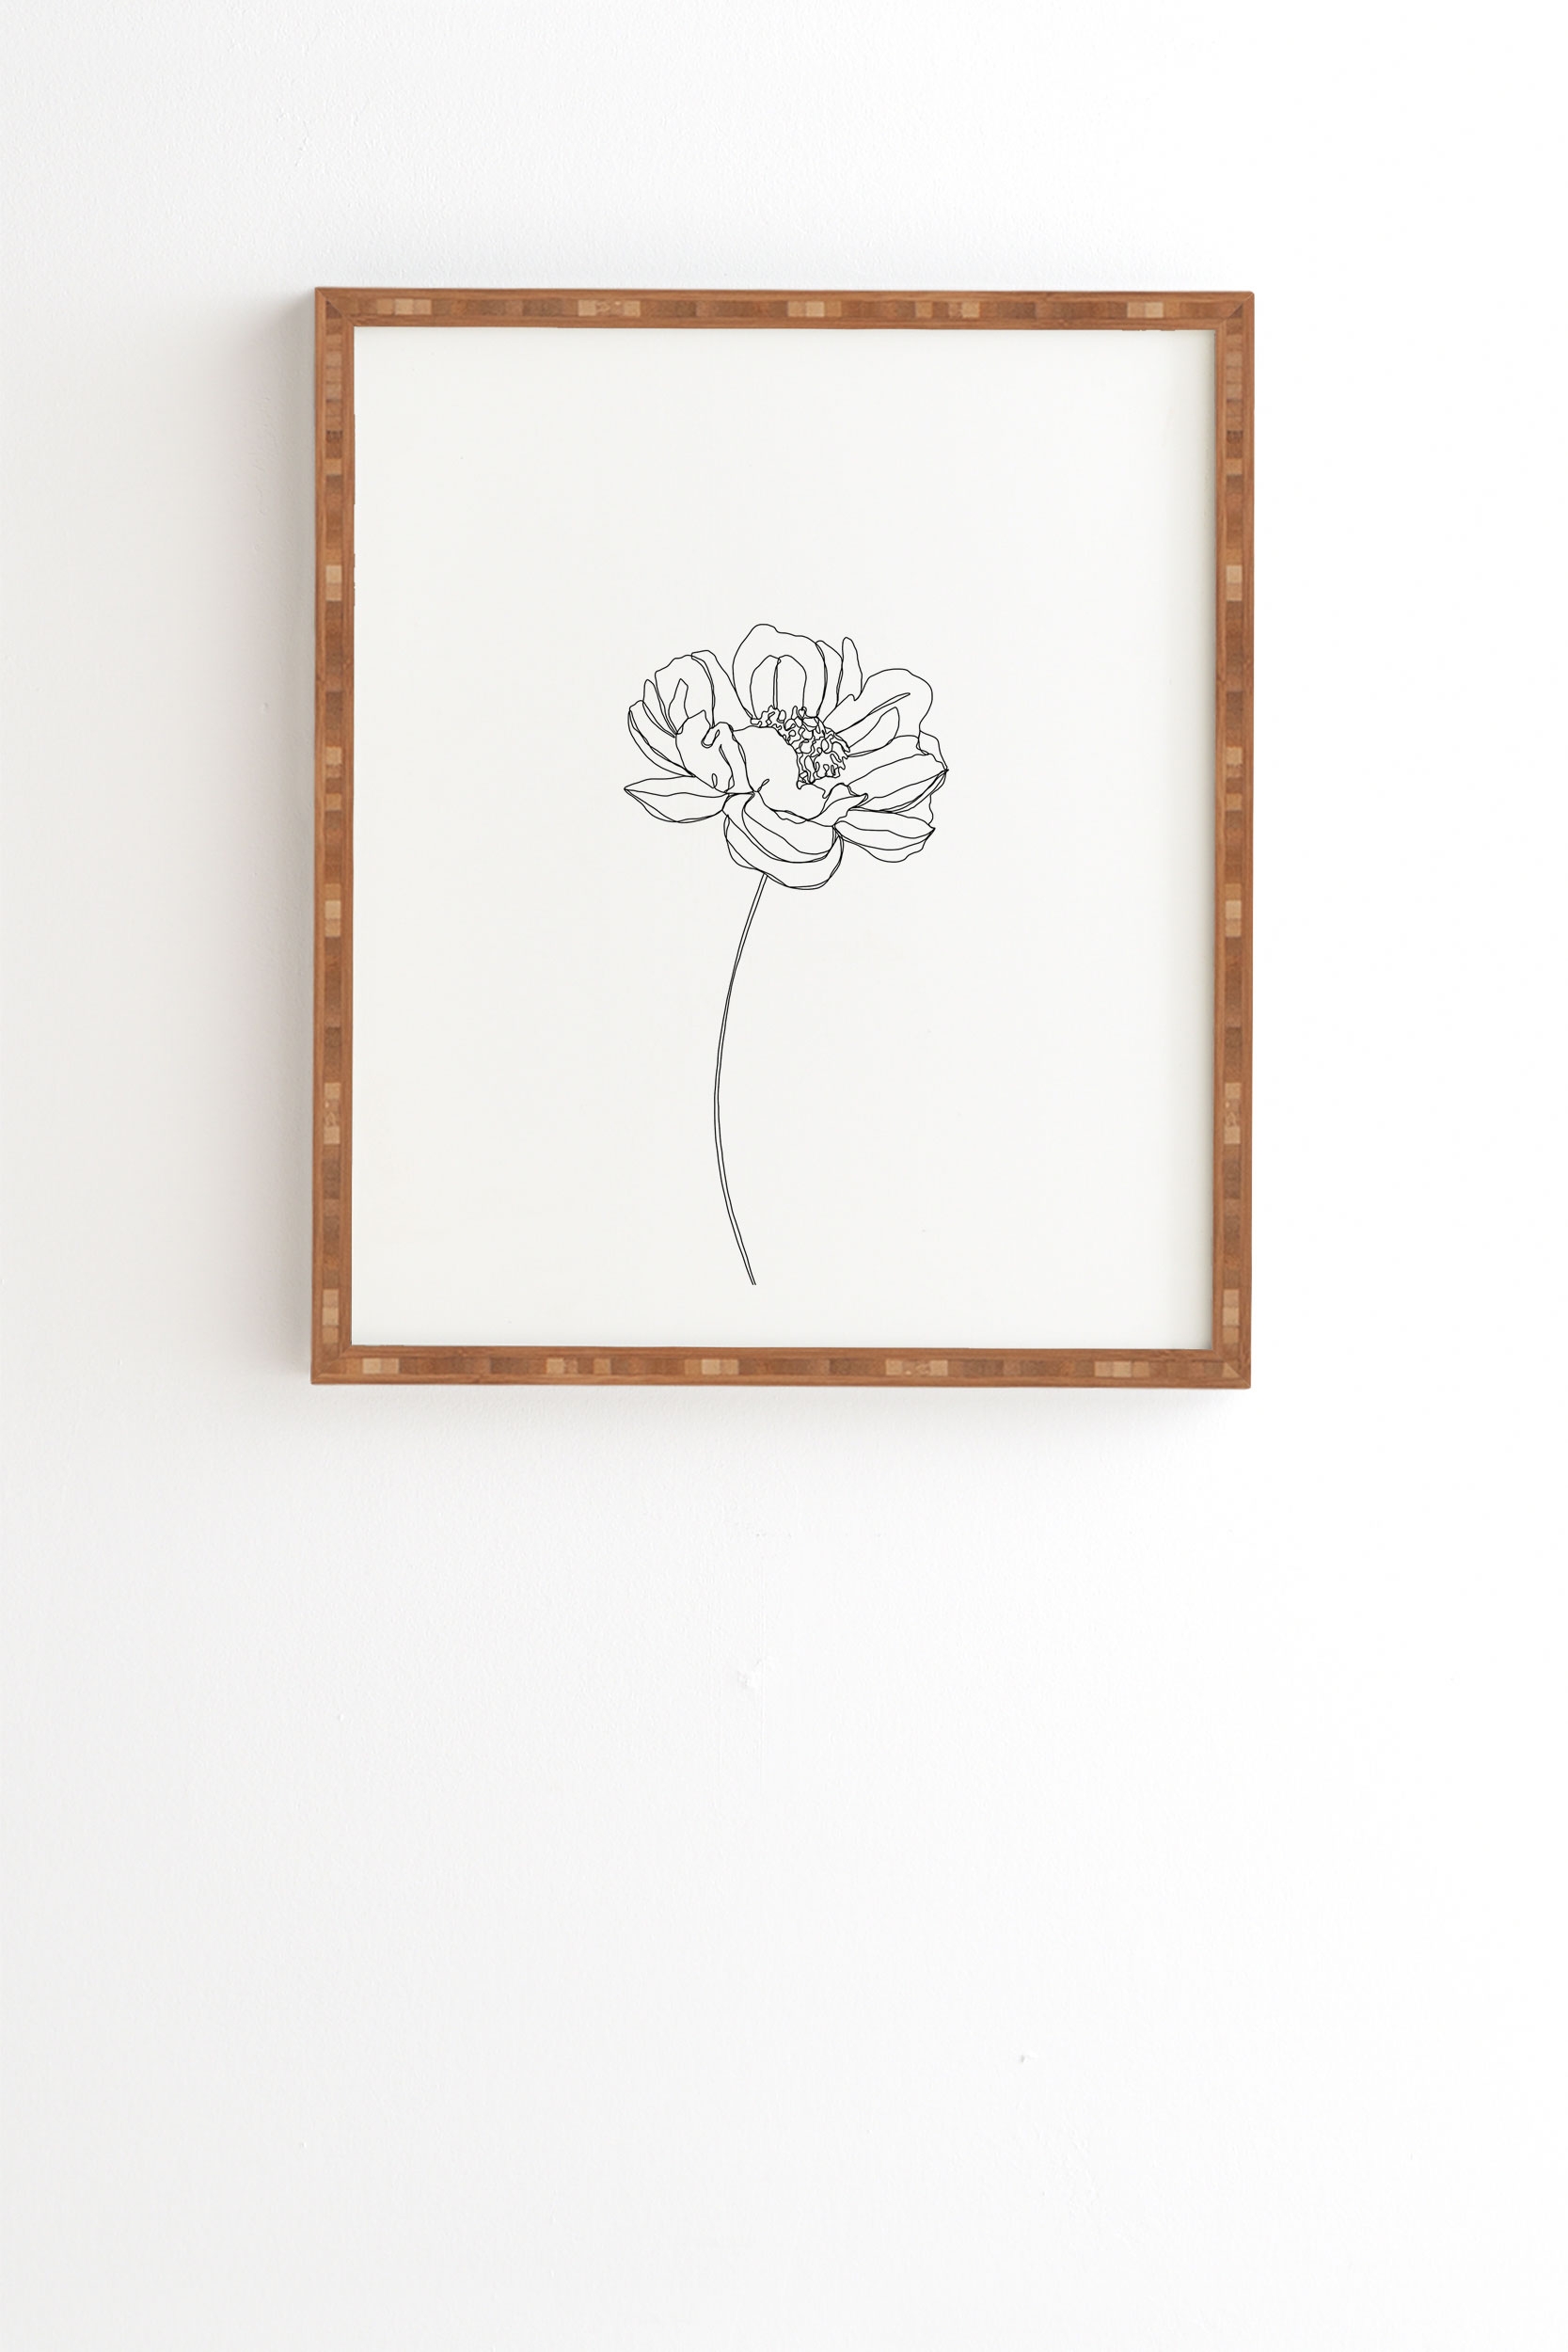 Single Flower Drawing Hazel by The Colour Study - Framed Wall Art Bamboo 20" x 20" - Image 0